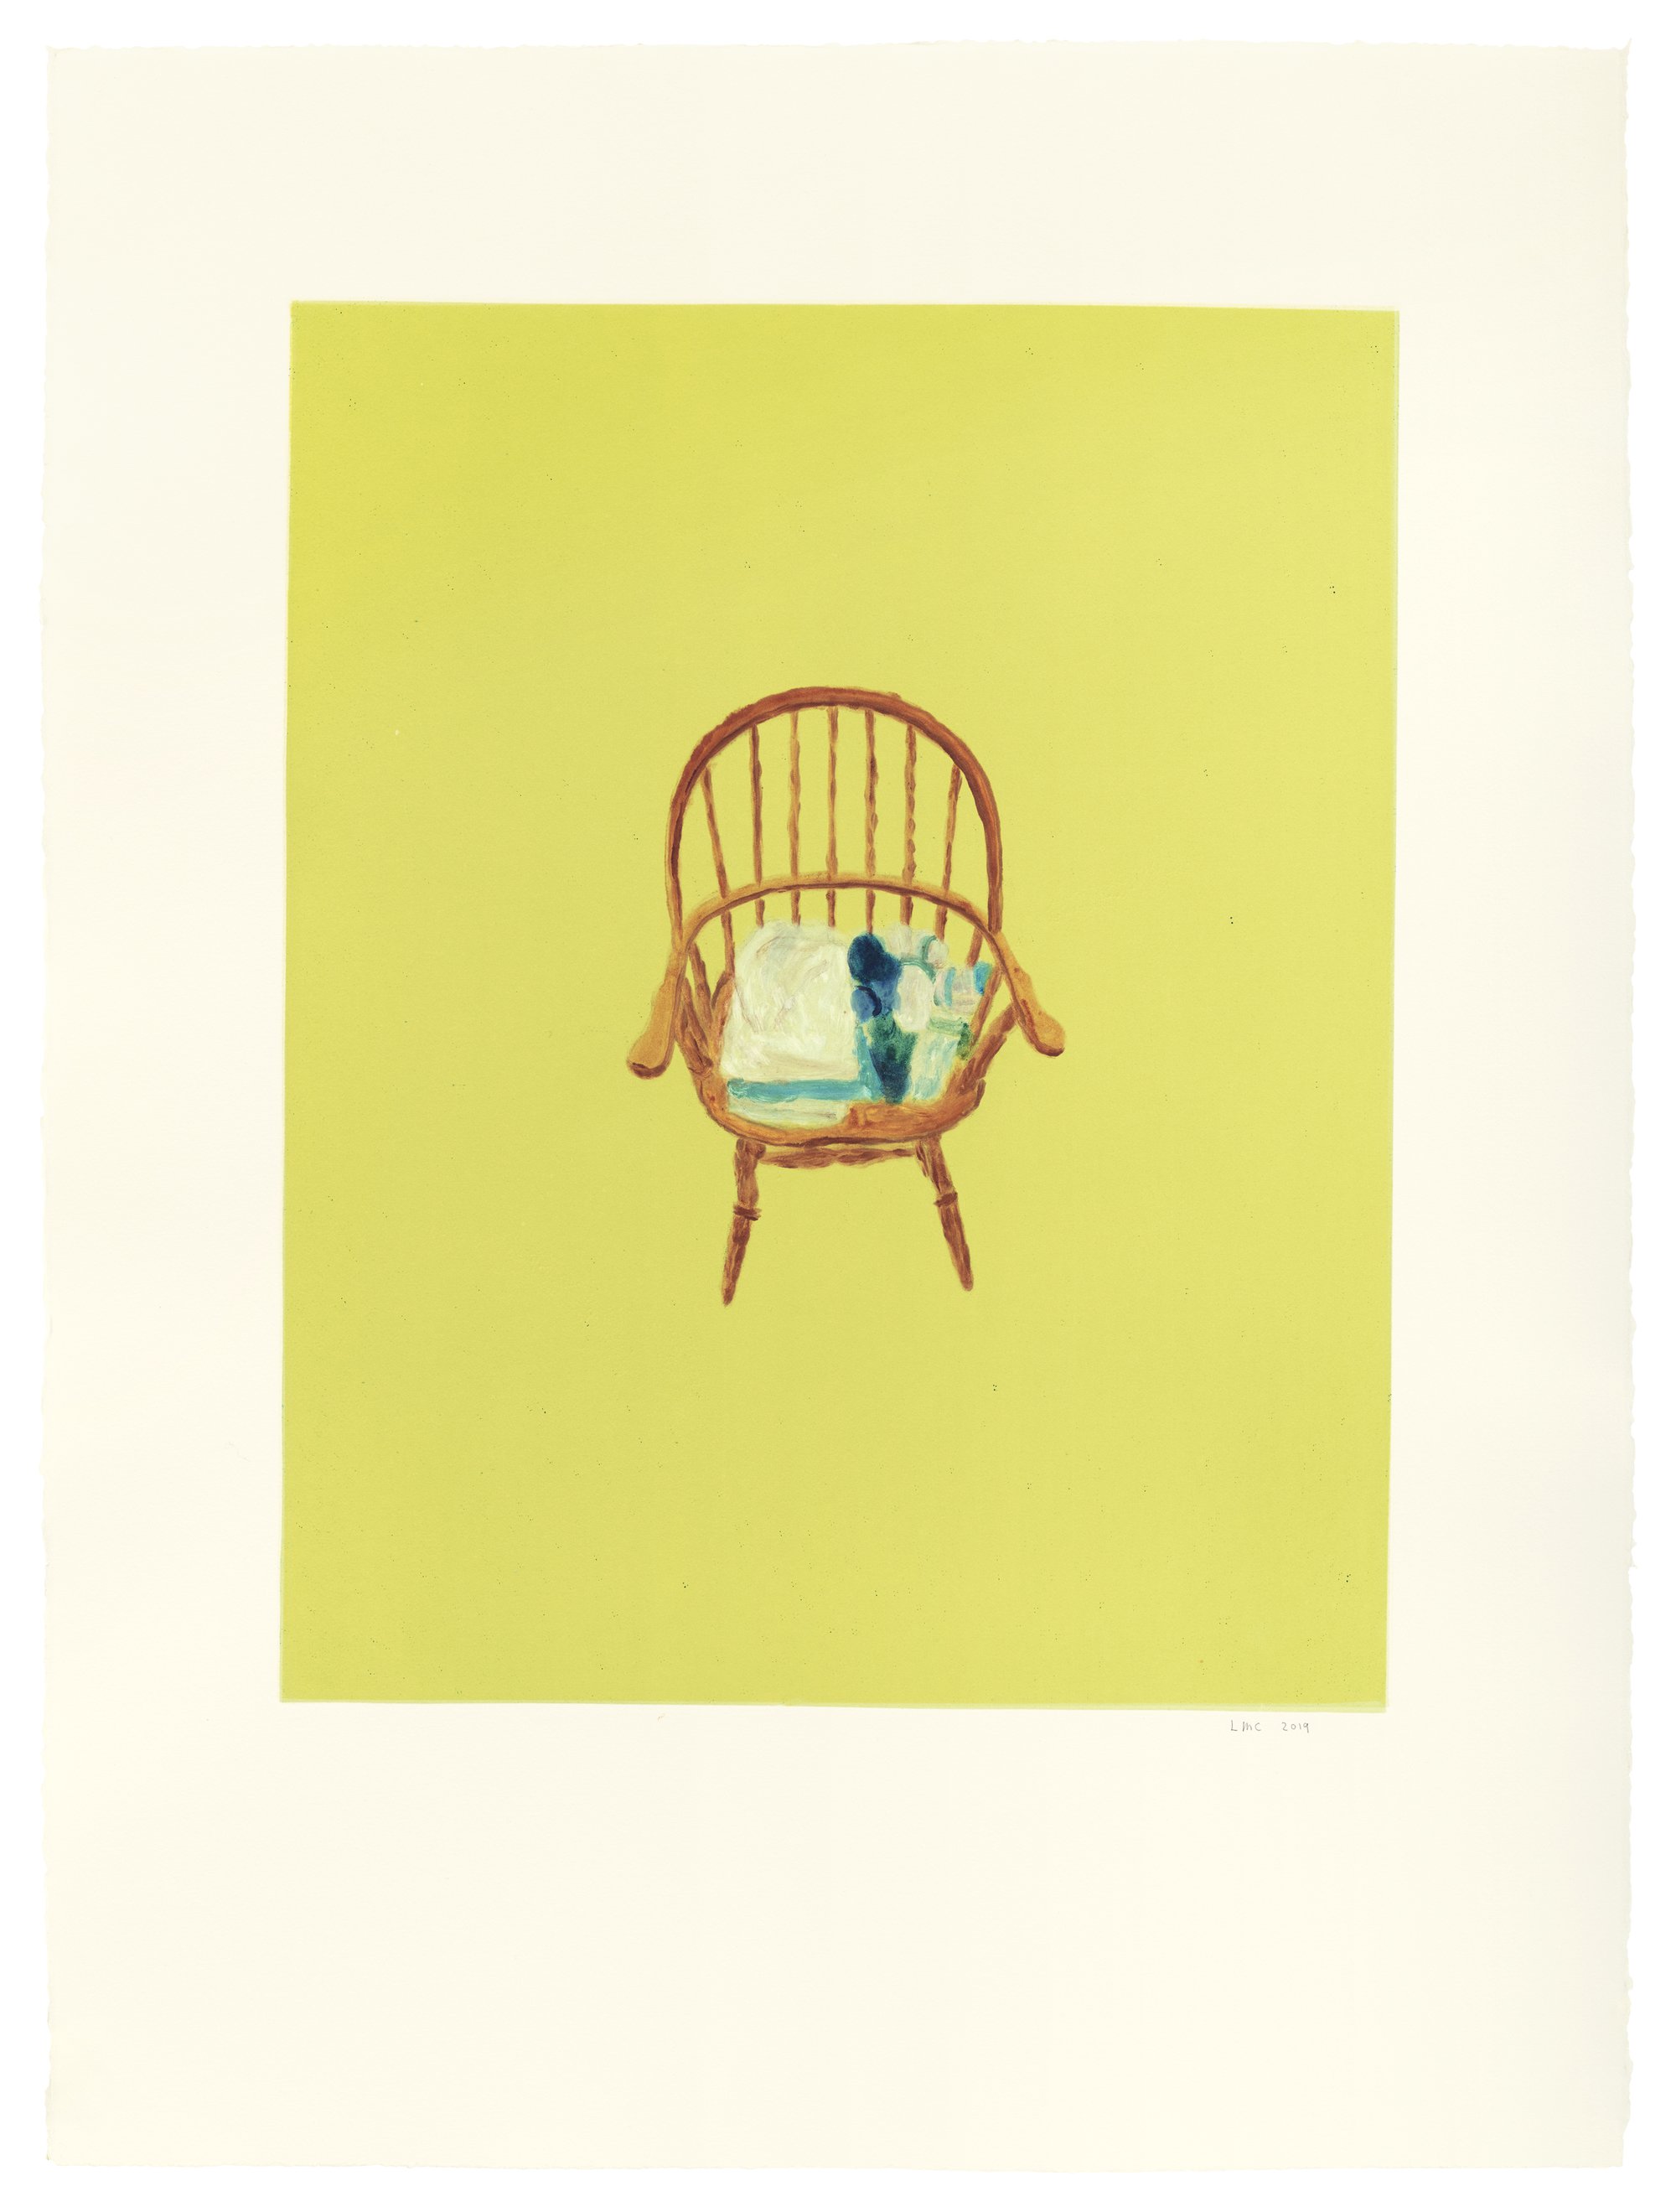 Leidy Churchman, Chair in The House (Magical Laundry #2), monotype, 82 x 63.4 cm framed (32 1/4 x 25 in framed), 2019